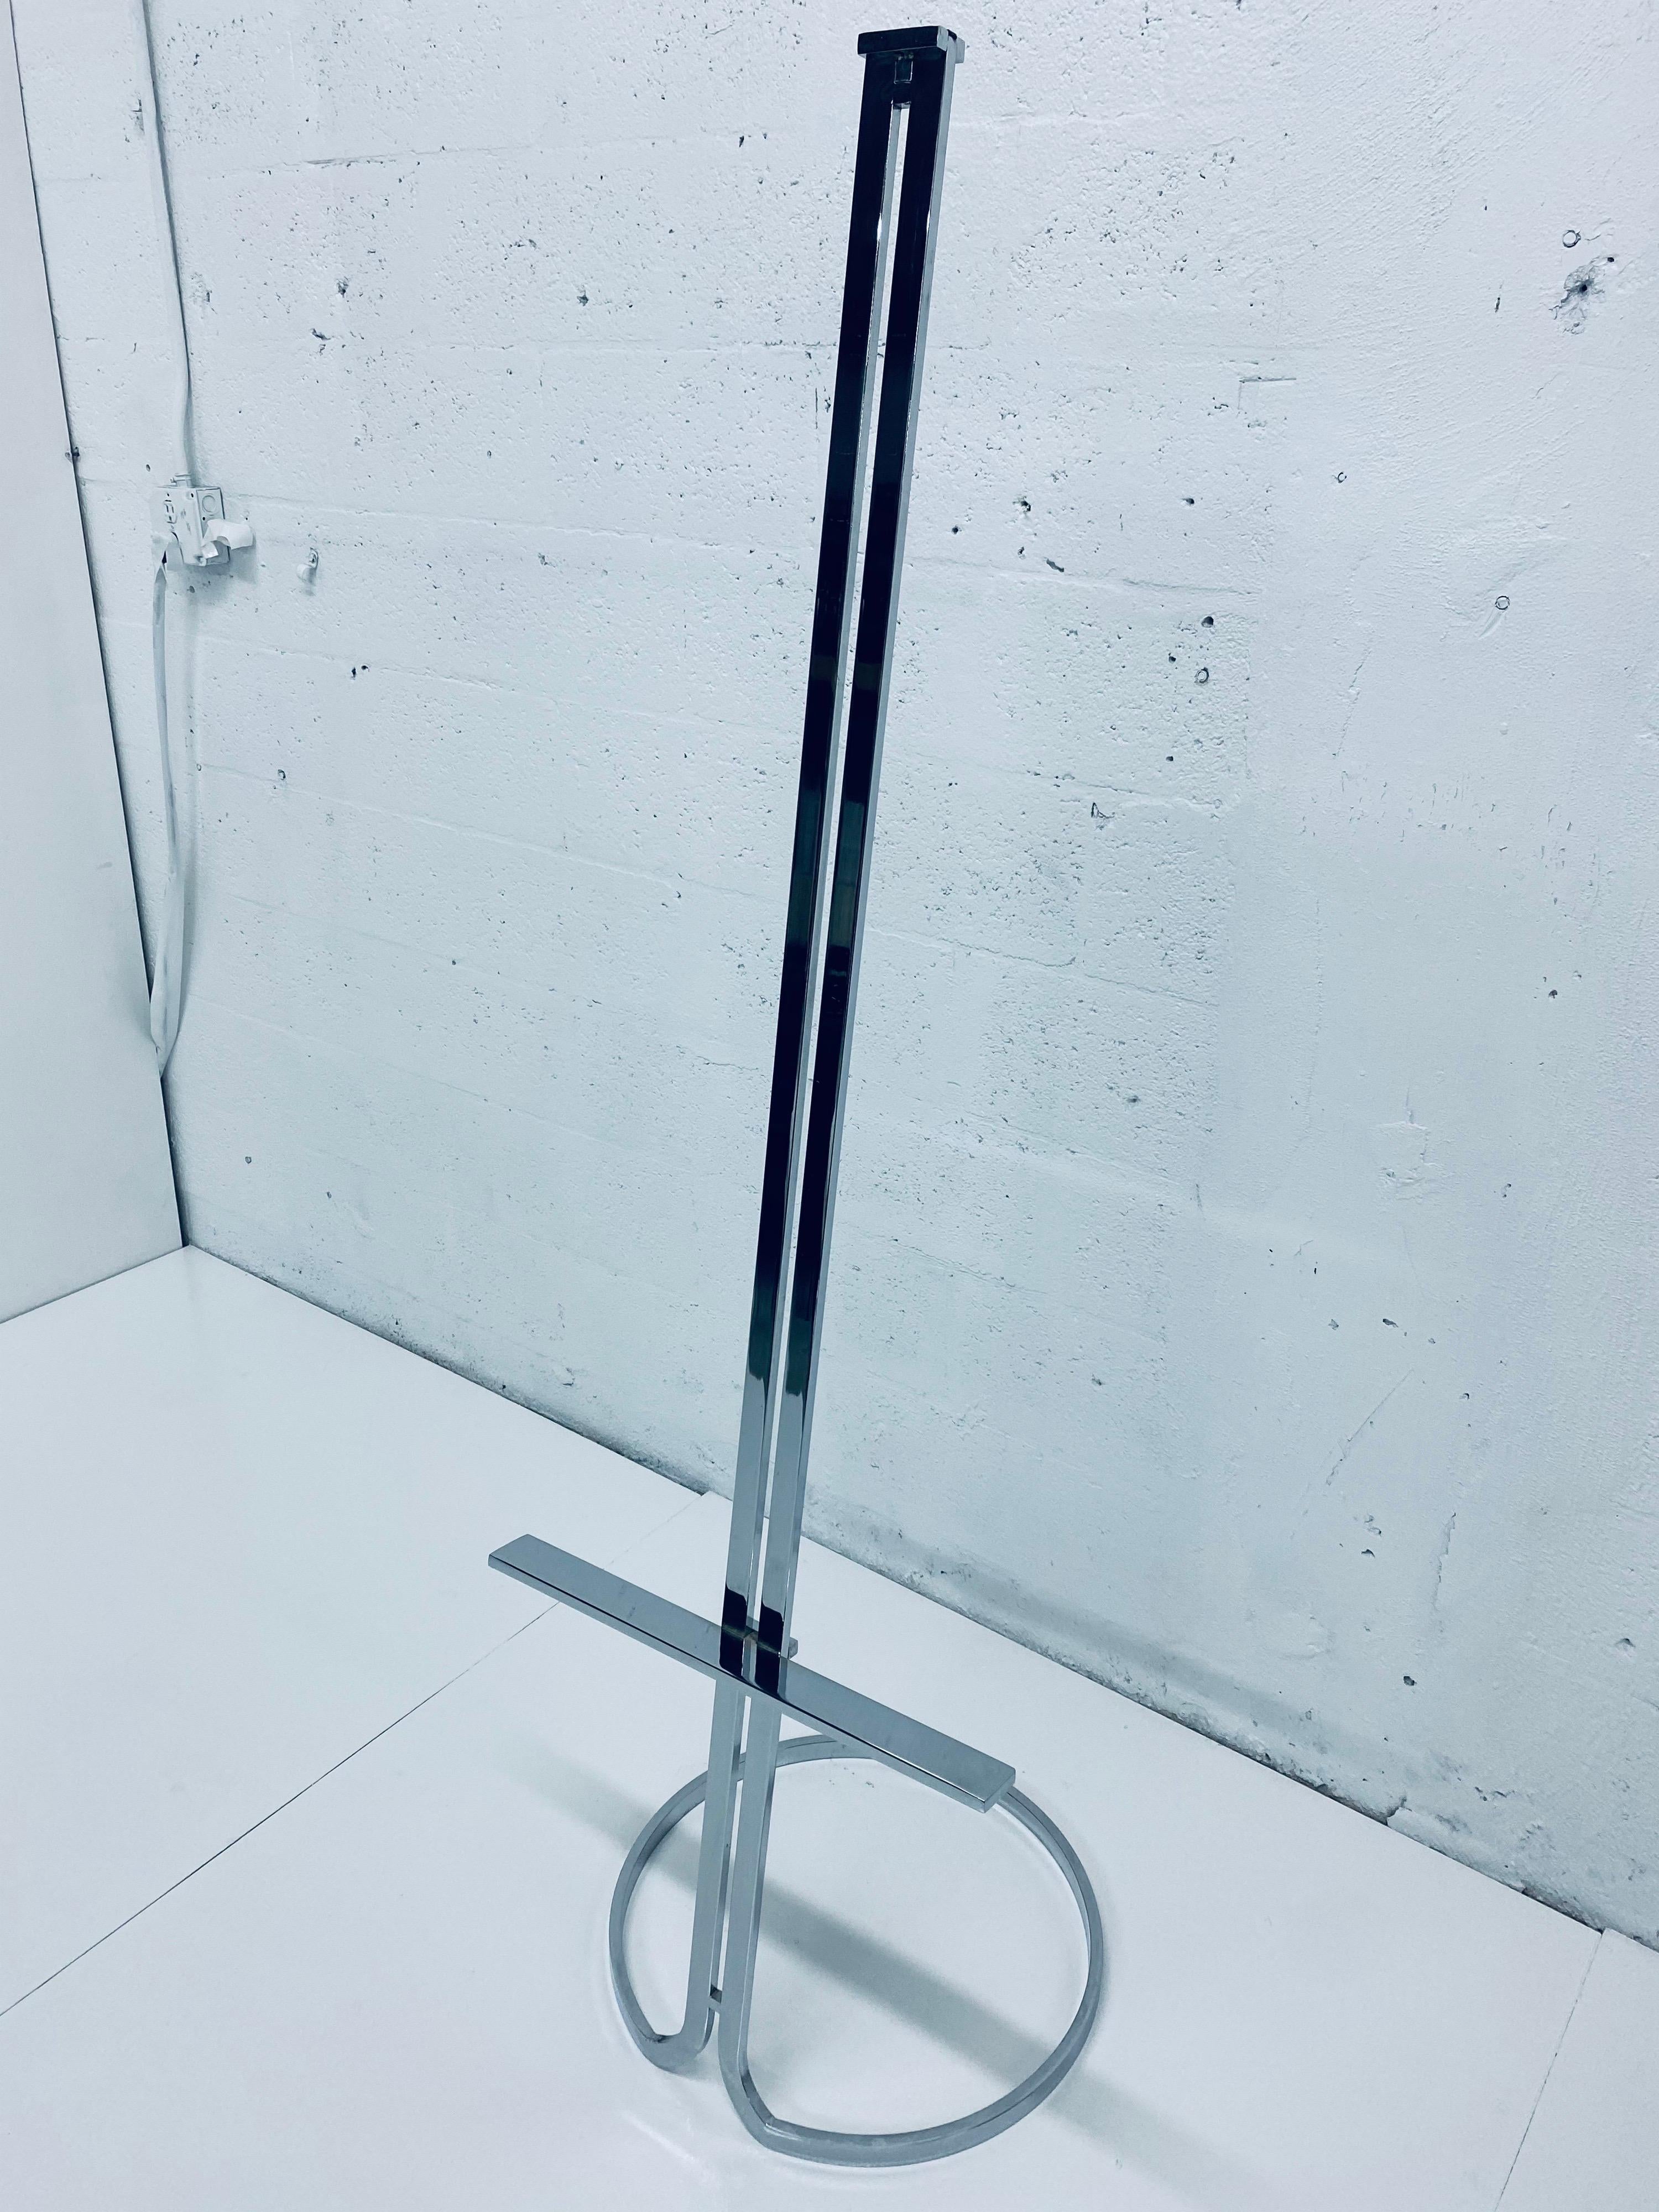 Polished chrome art easel from Italy, 1970s. Easel has double stem design with adjustable ledge and a stylized circular base.